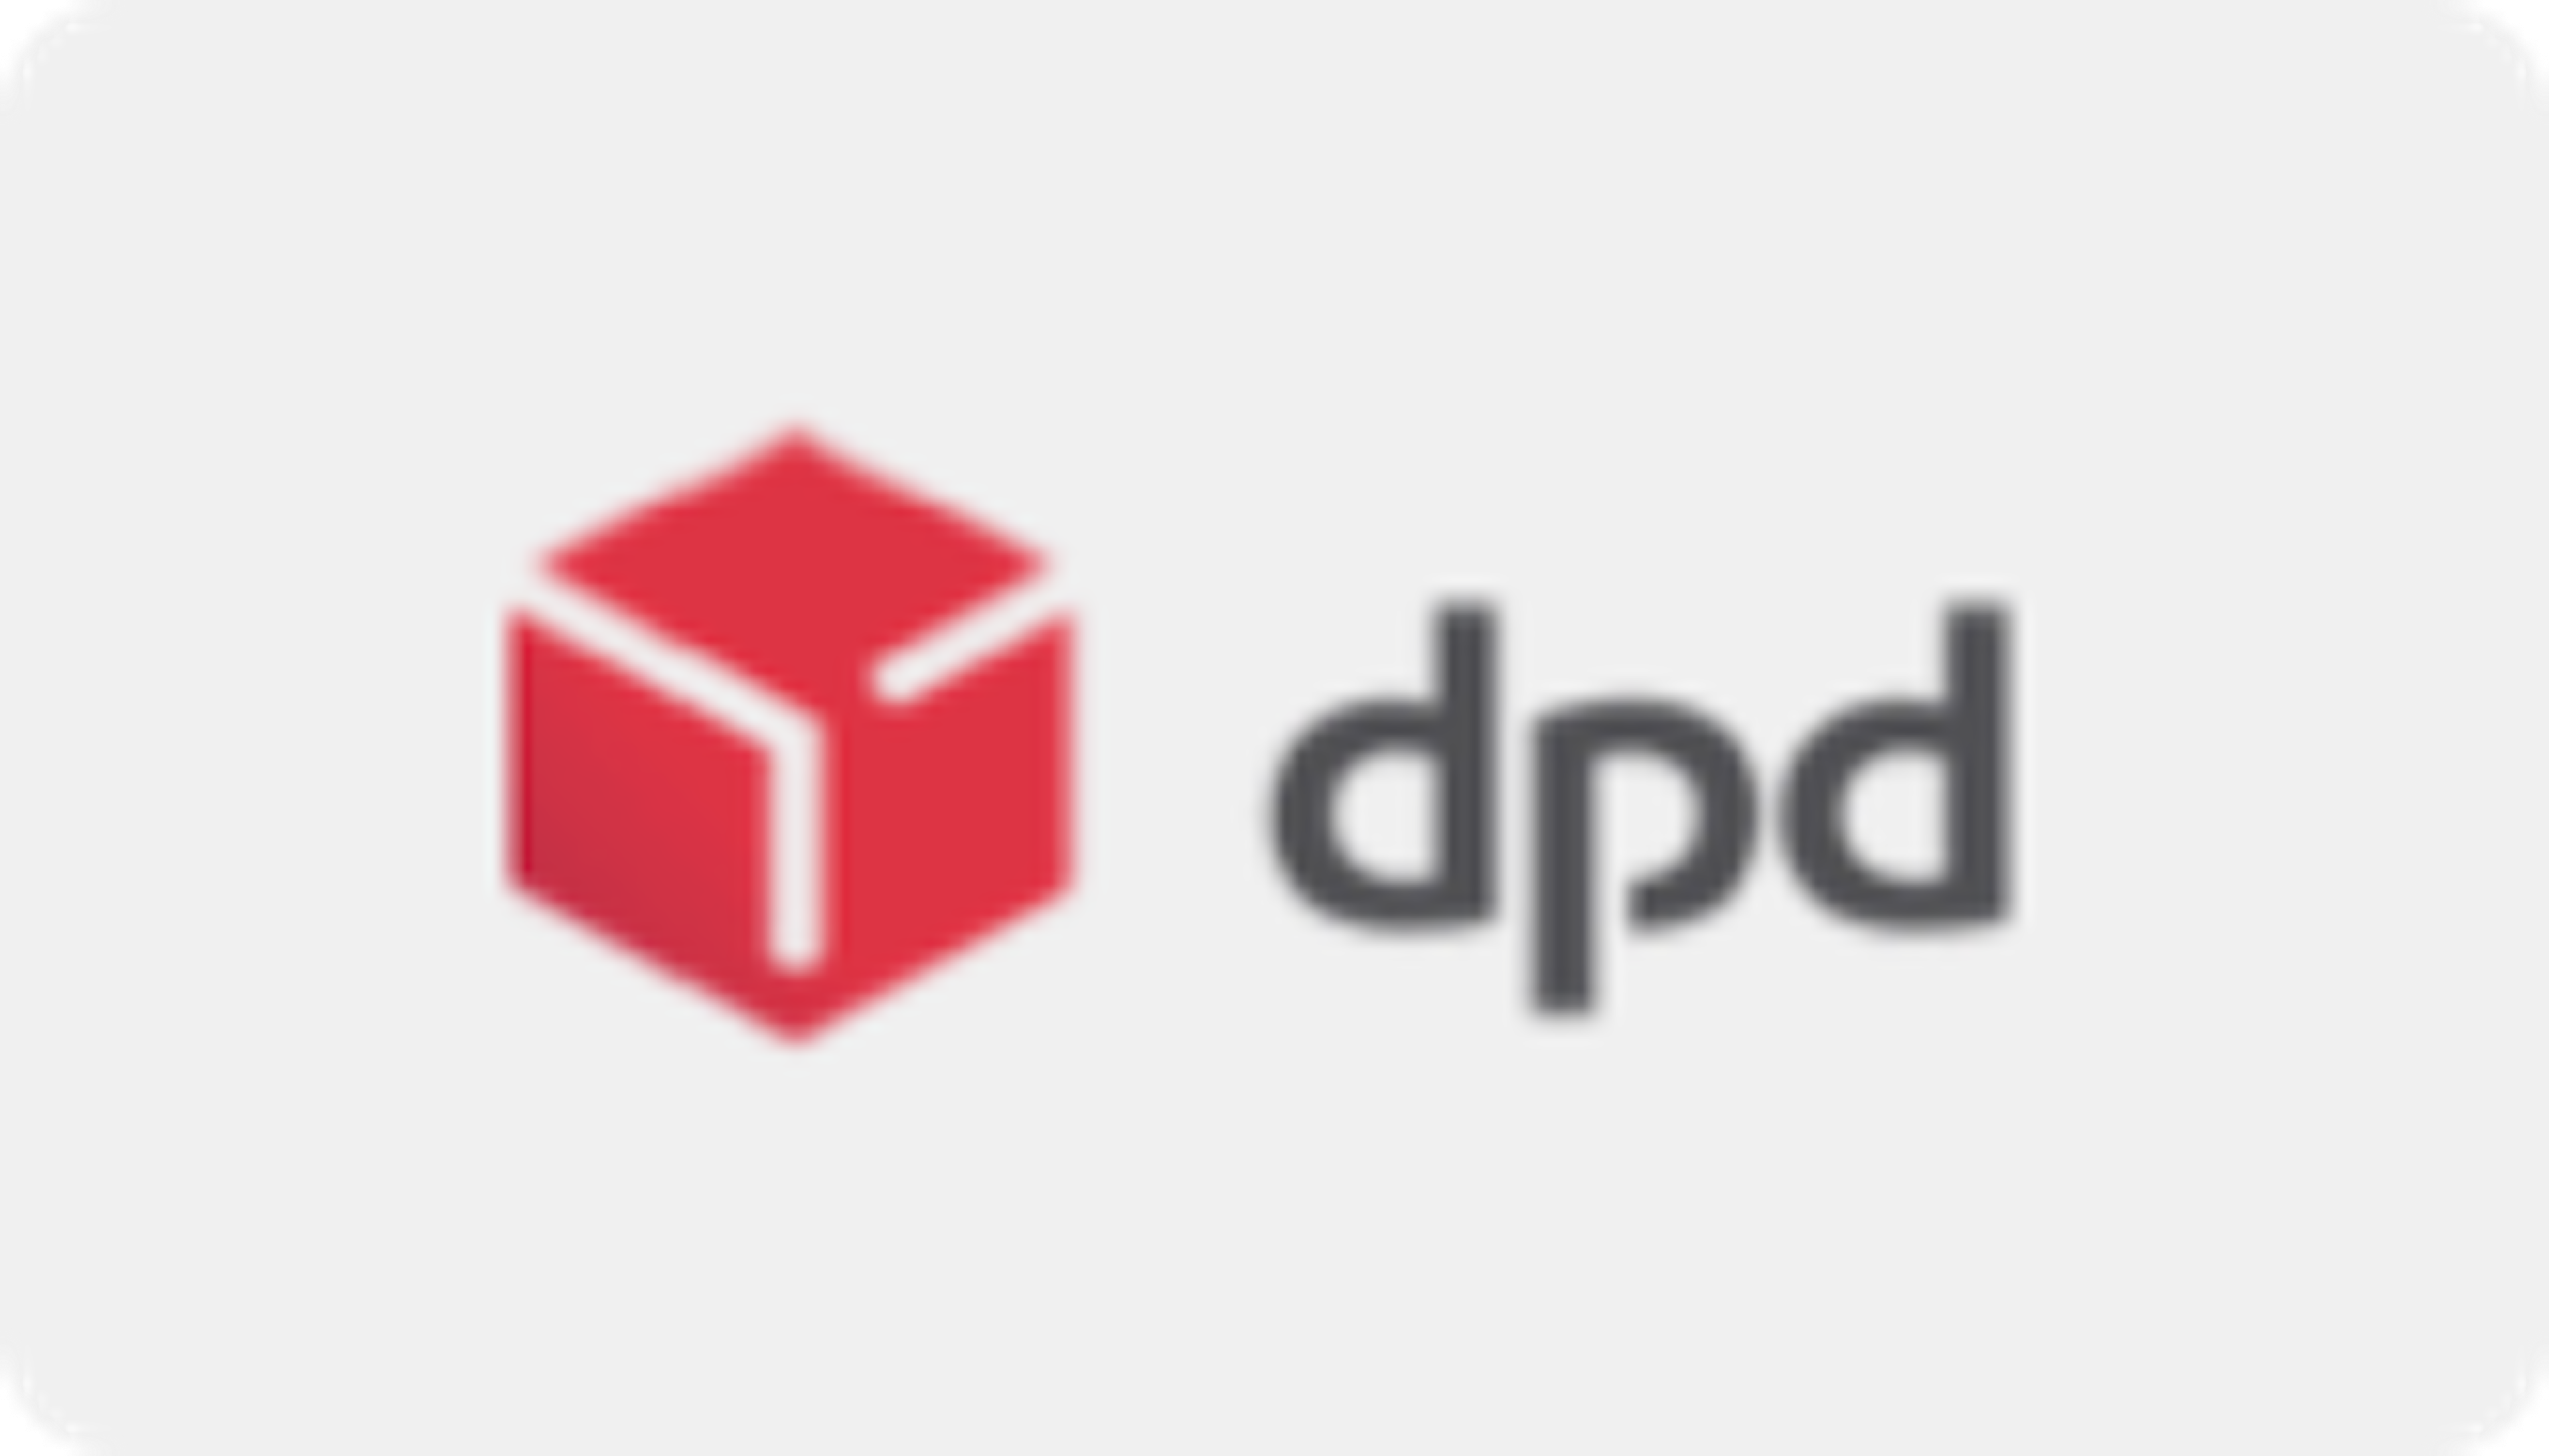 assets::shipping/partner-dpd@2x.png